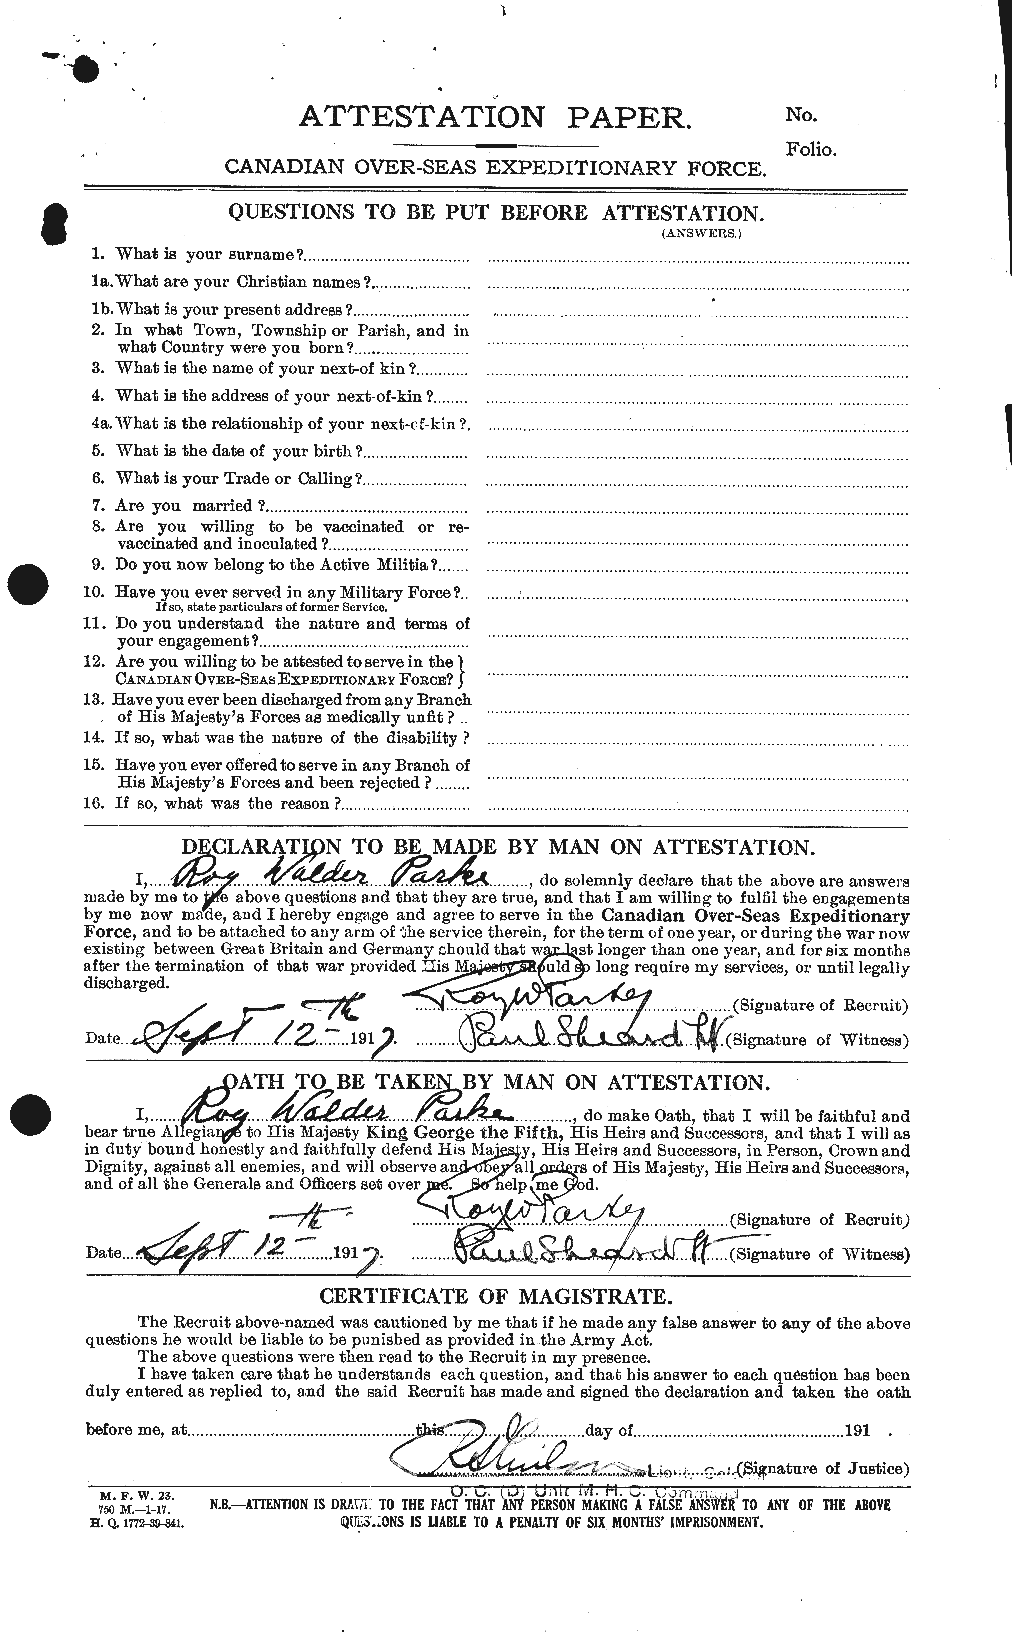 Personnel Records of the First World War - CEF 564944a